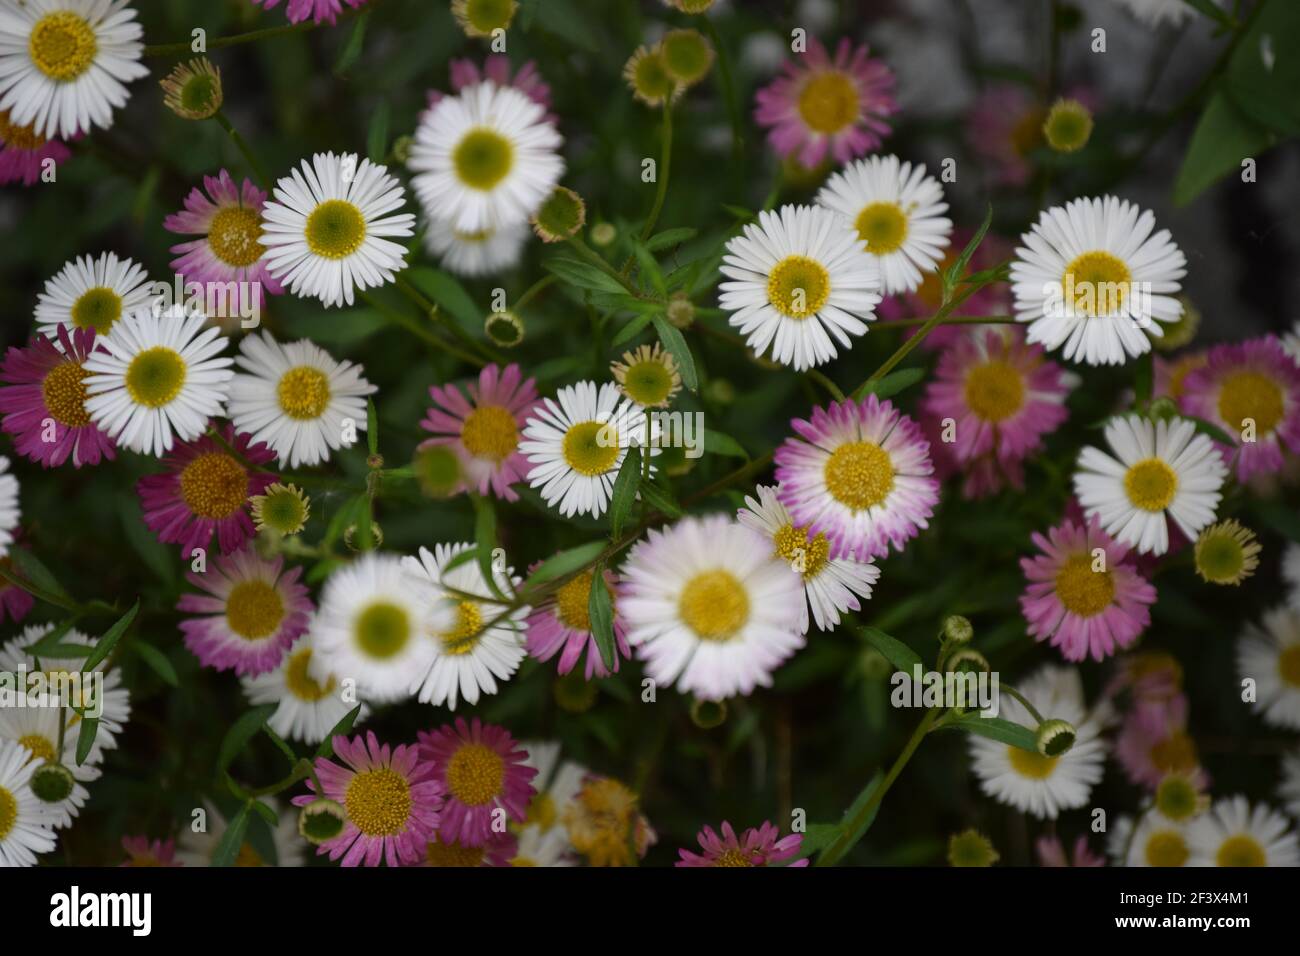 White and Pink Daisies Stock Photo